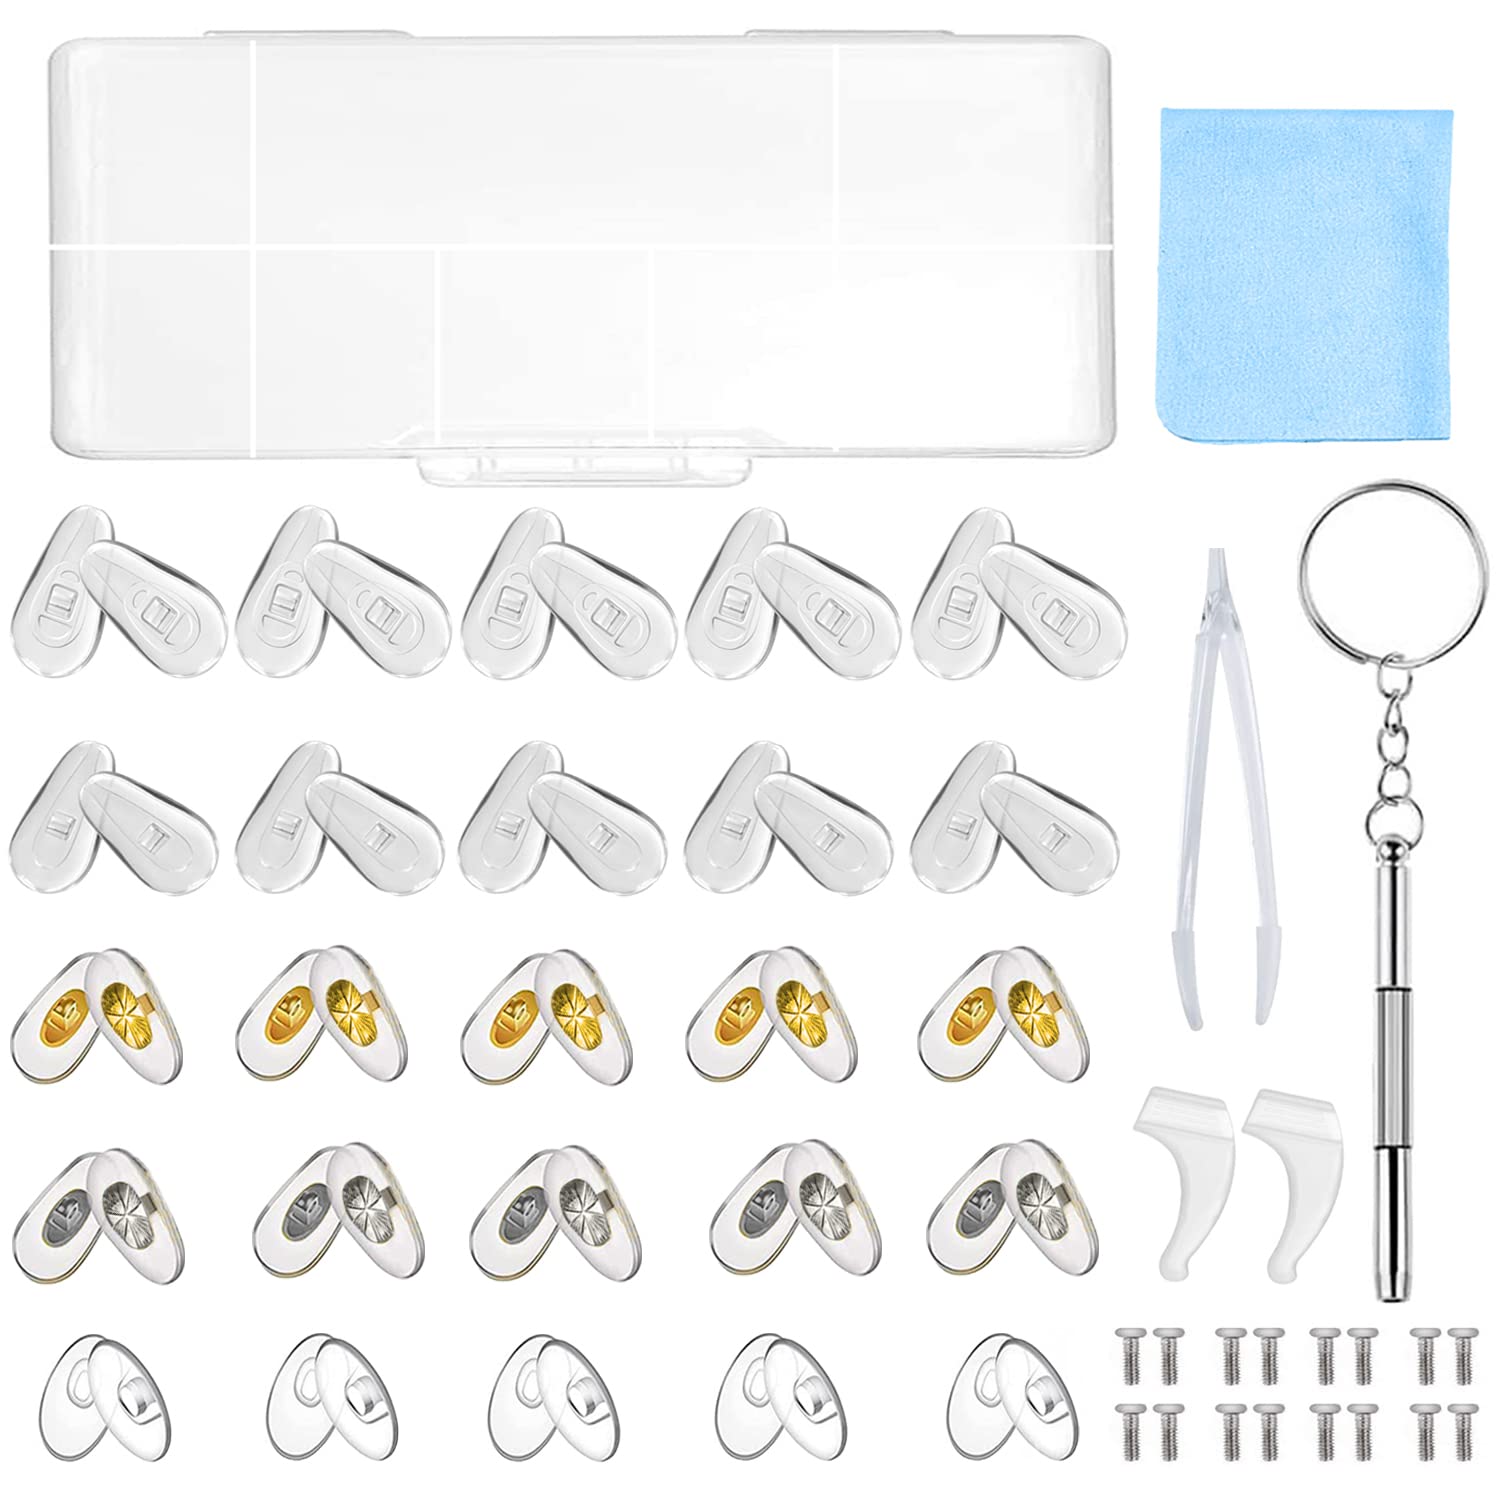 25 Pairs Glasses Nose Pads Silicone, Screw-in Nose Pad for Glasses Eyeglass Repair Kit with Screws Tweezer and Cleaning Cloth